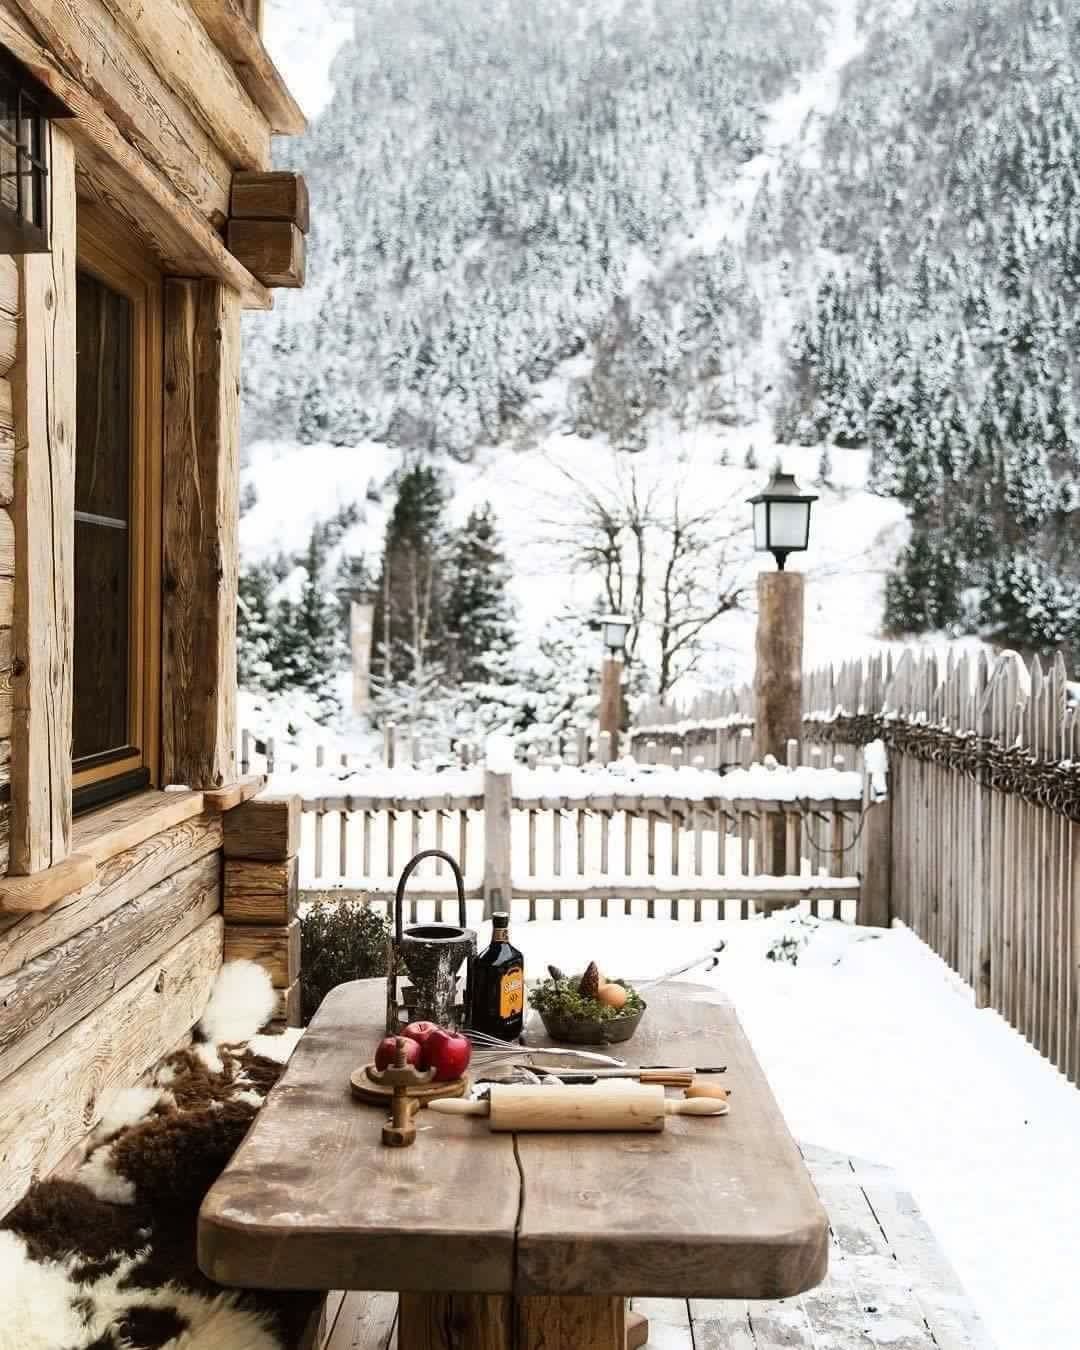 snow on a winter cabin house